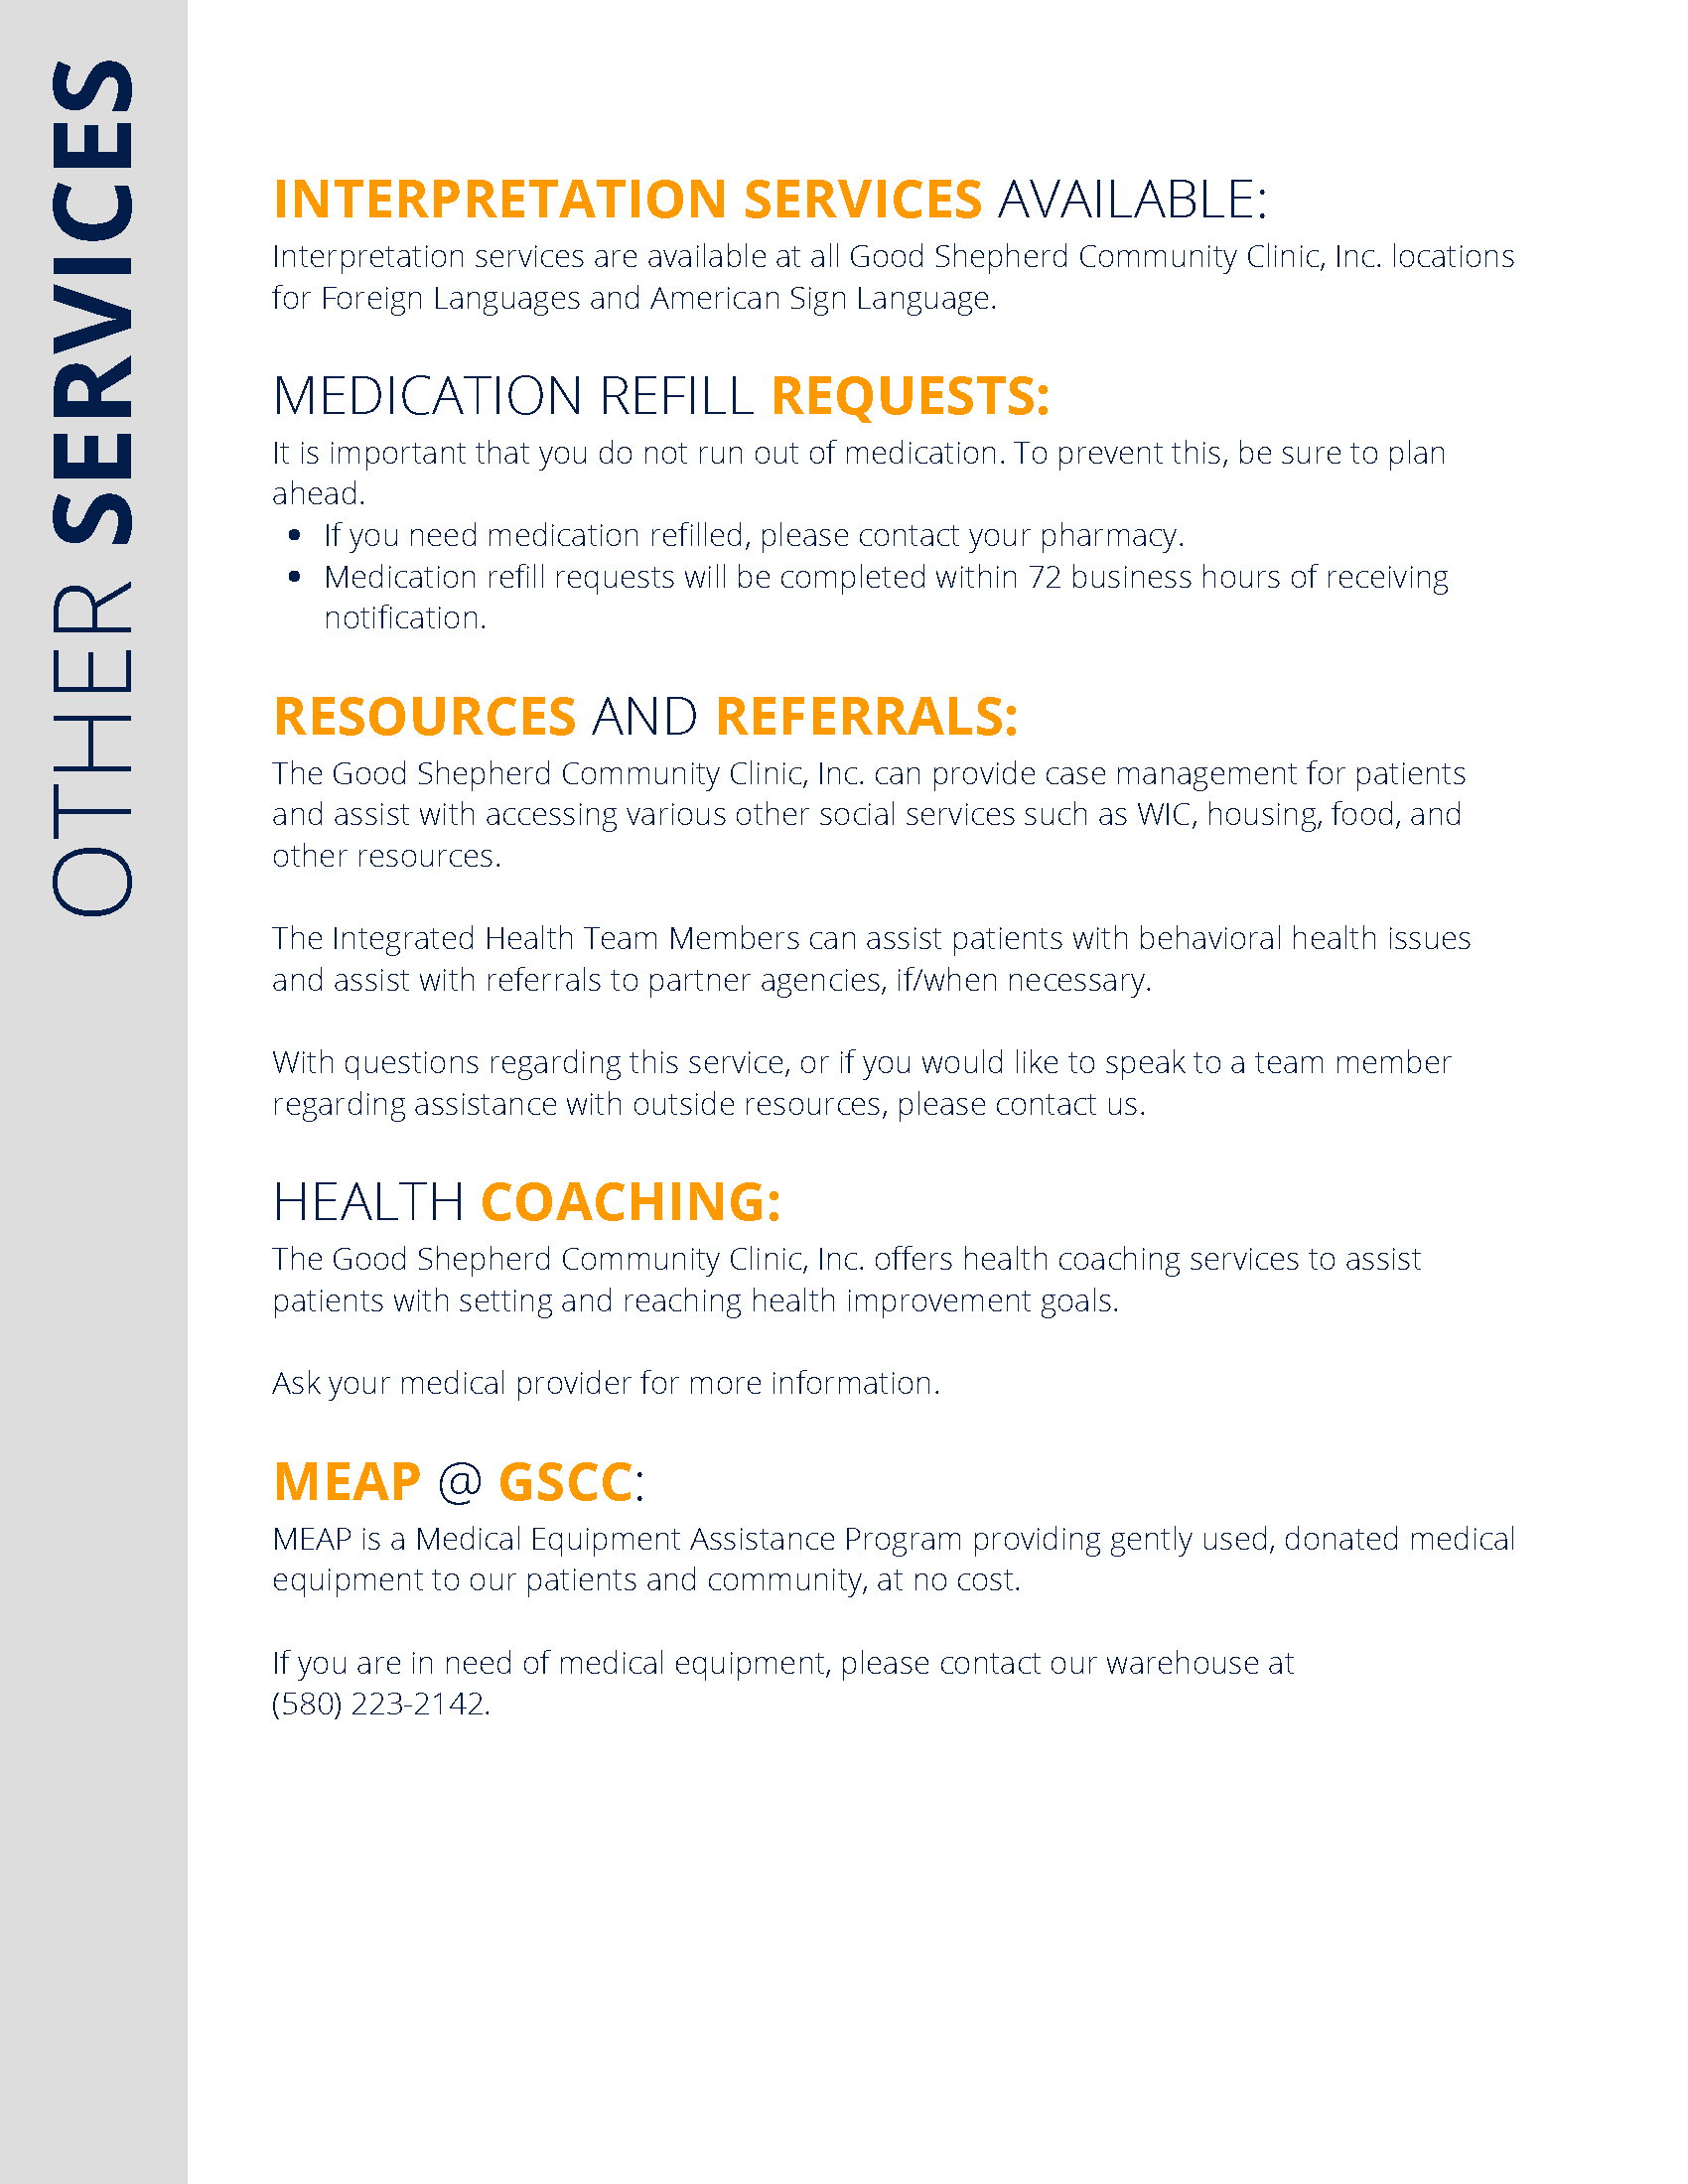 Patient Handbook 10.23 (English)_Page_06.png